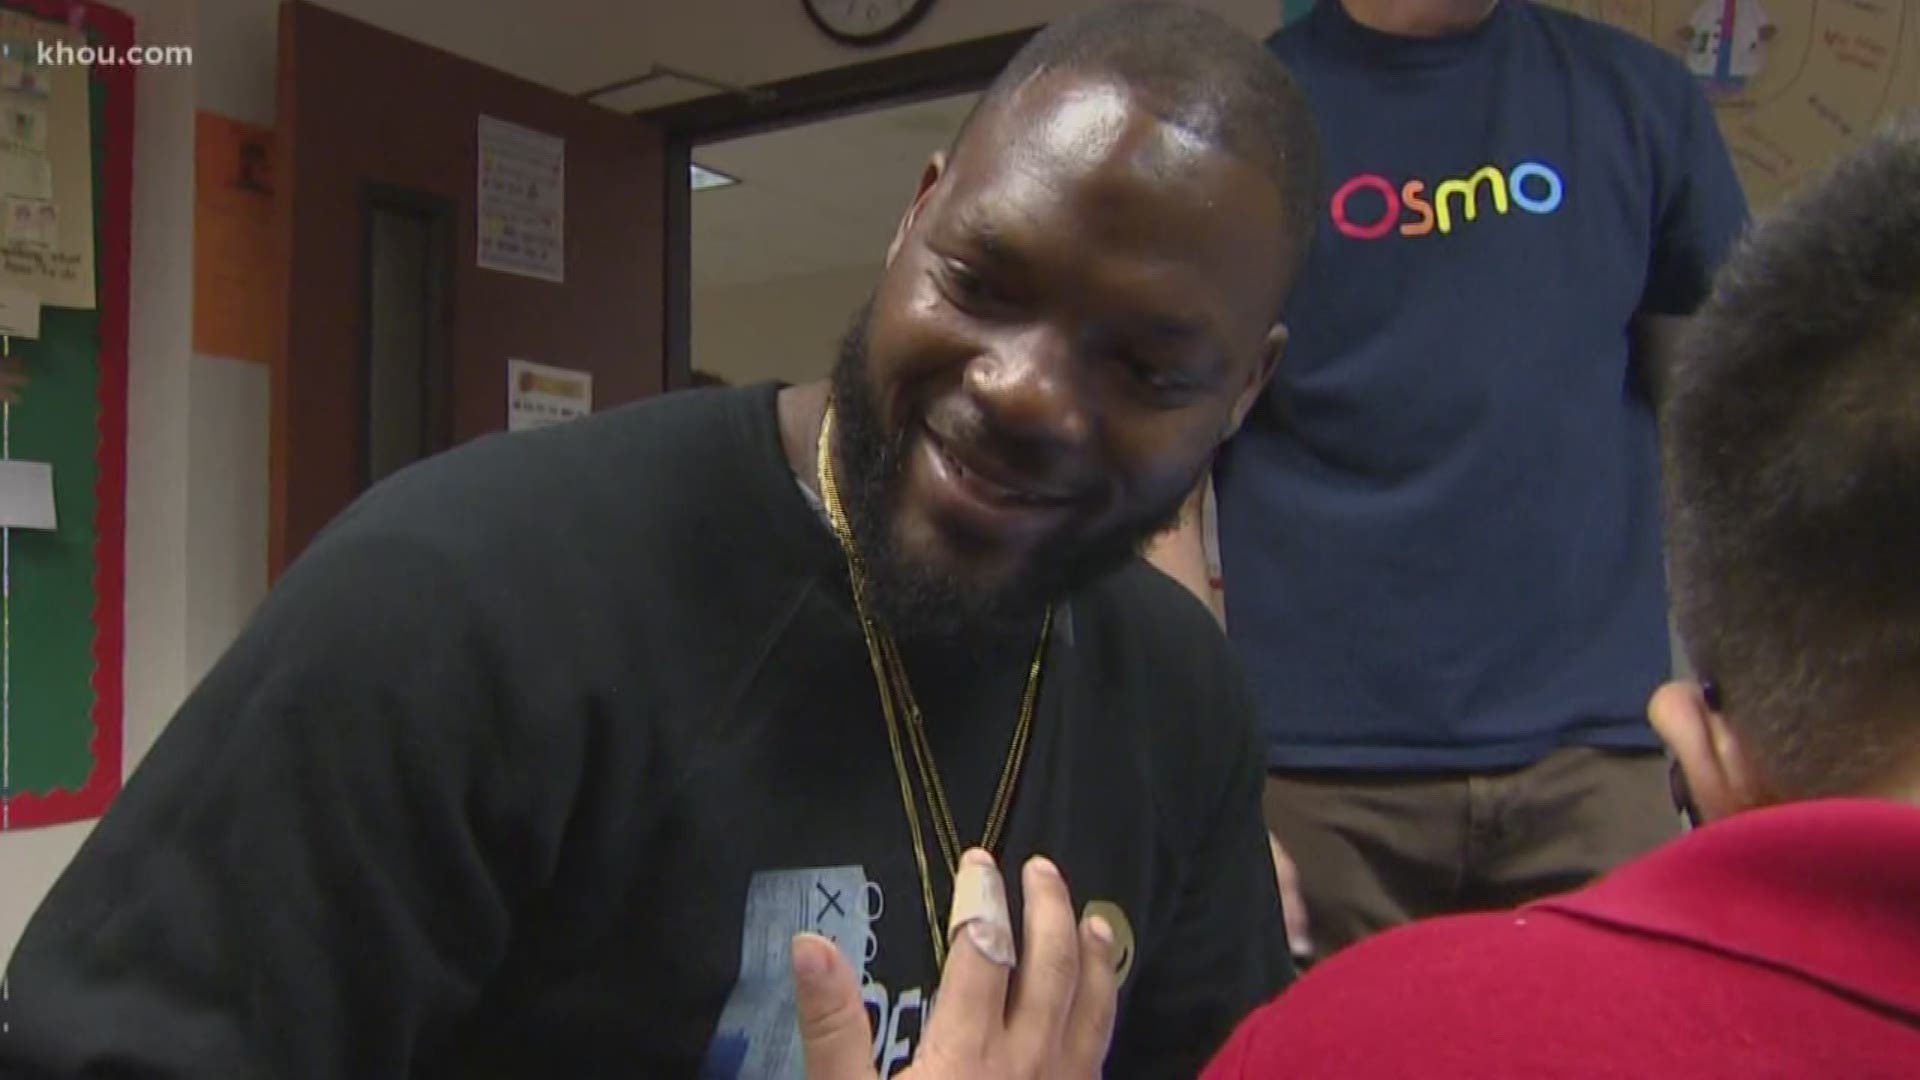 Former NFL Pro Bowl tight end Martellus Bennett was back at his old elementary school in Alief visiting kids in a kindergarten class. He's helping them combine physical and digital play to learn how to deal with words and math topics.